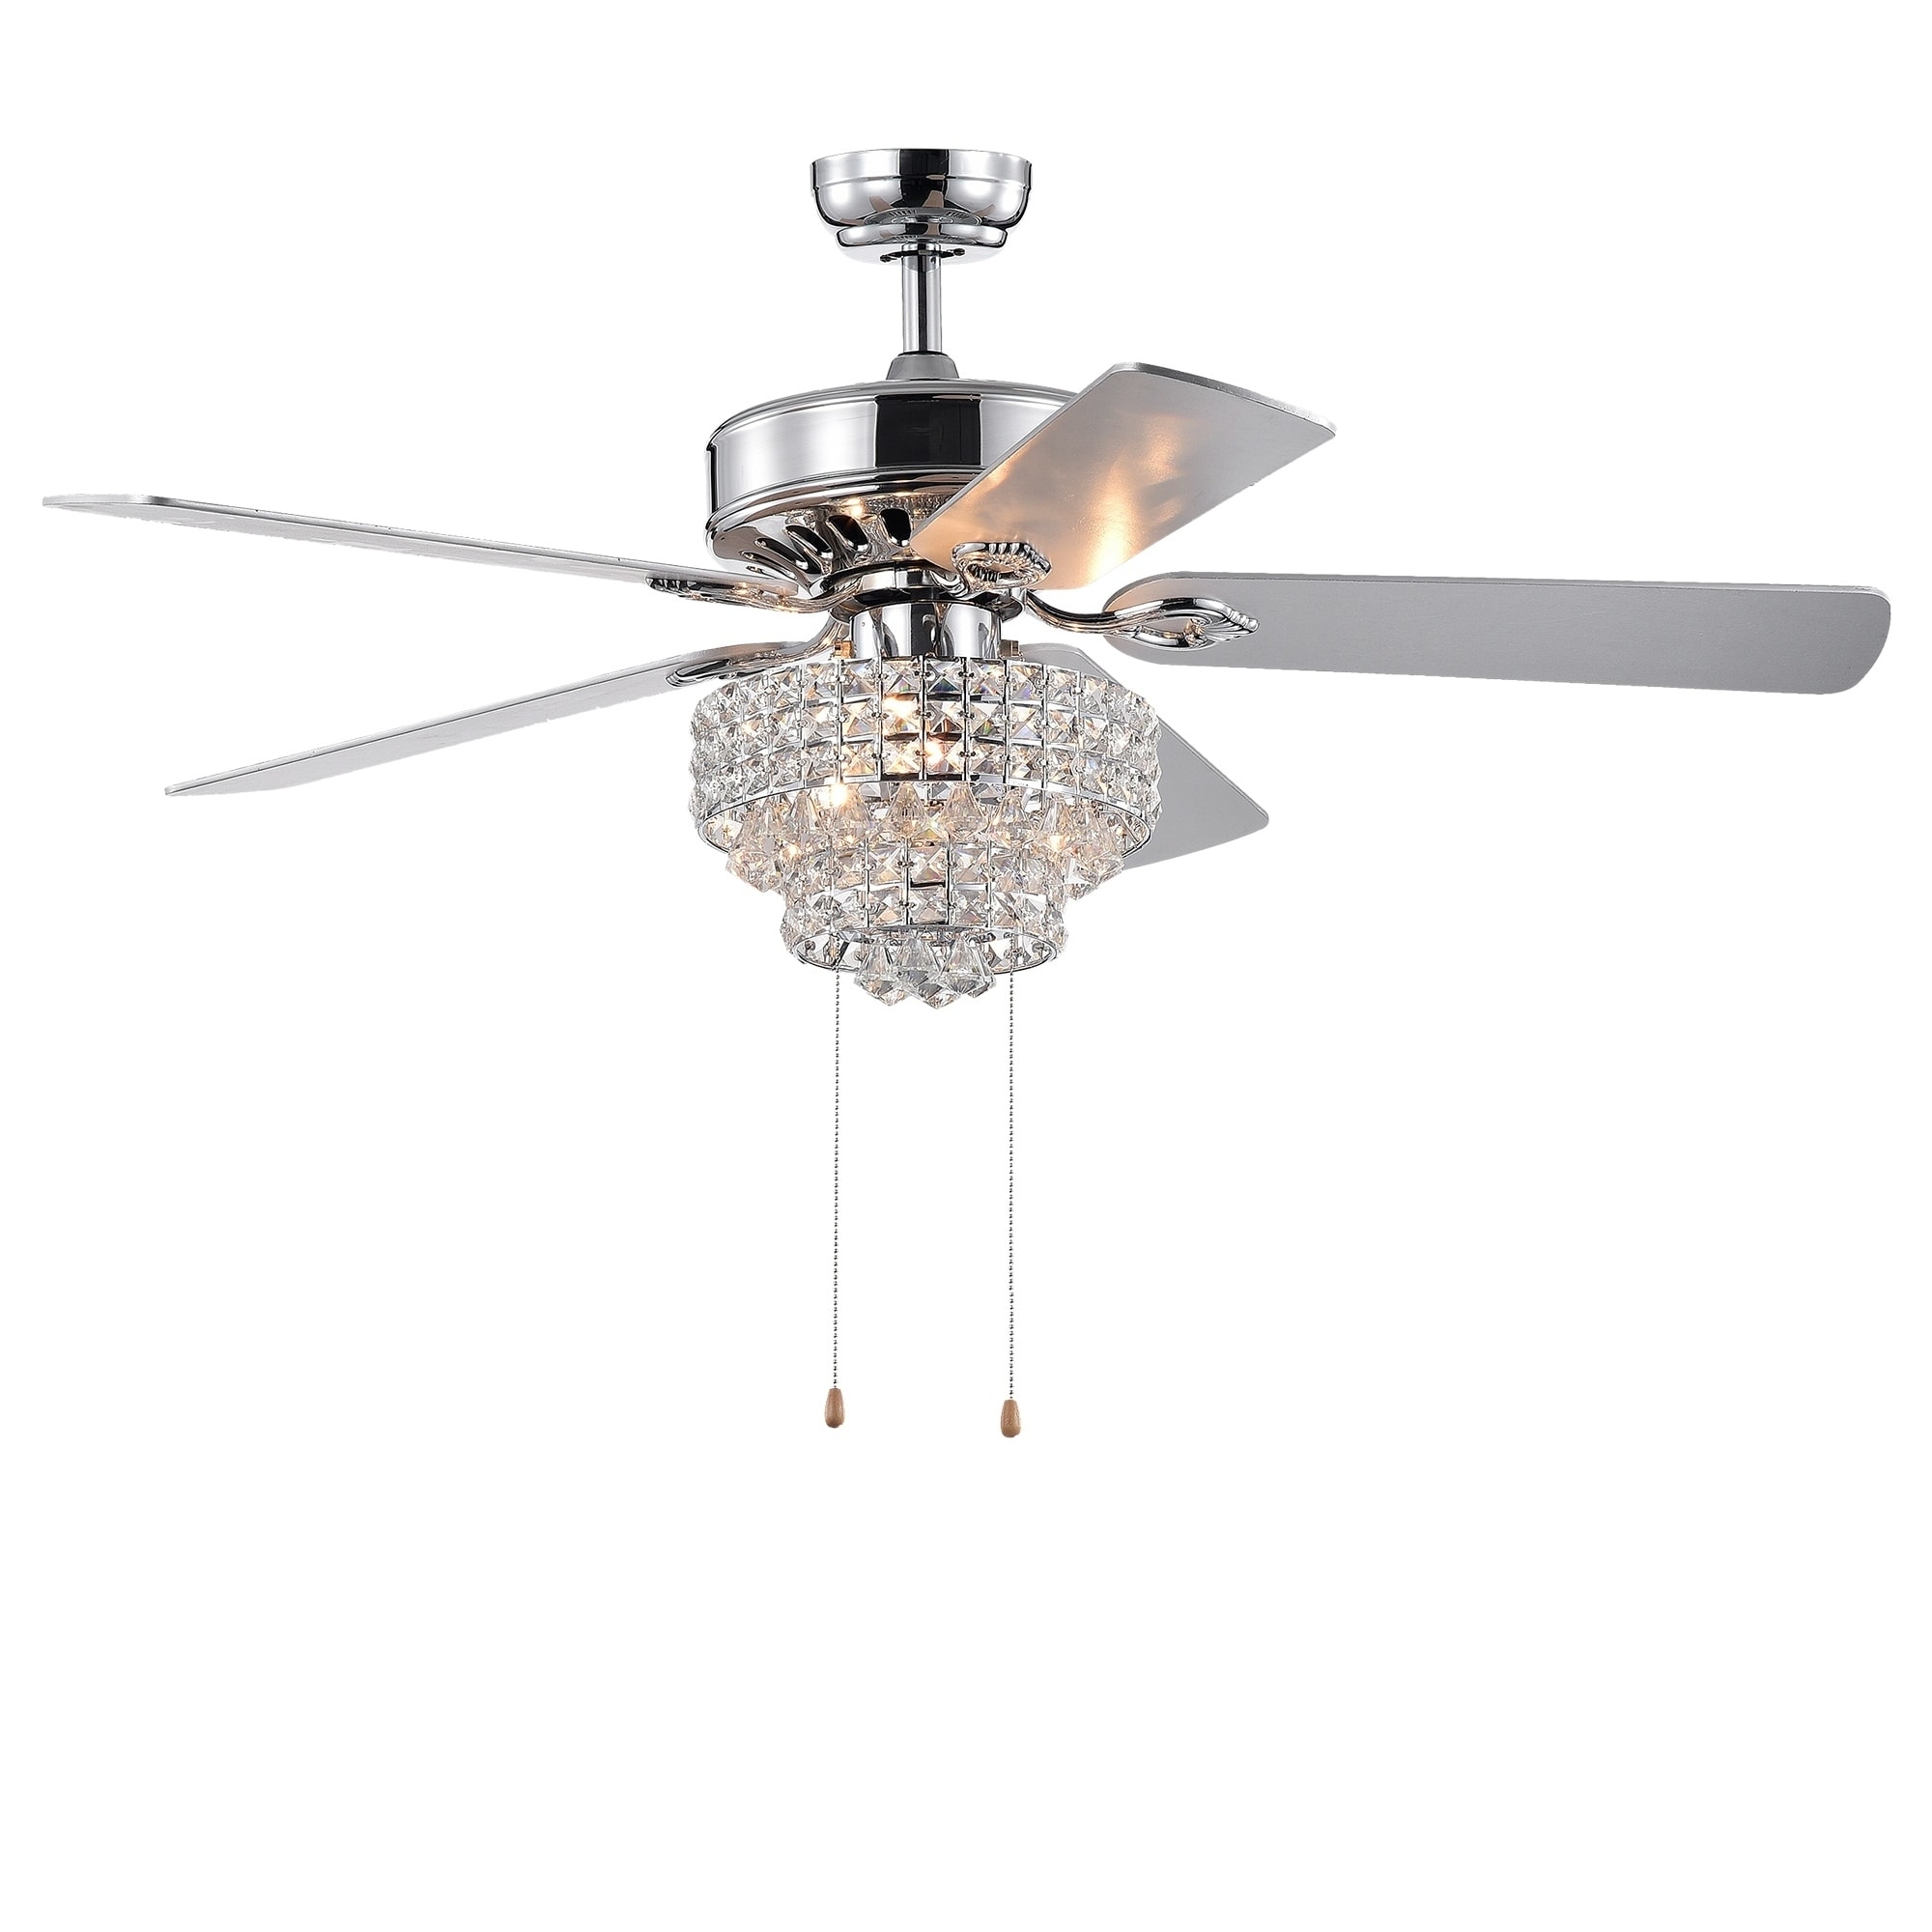 Bryanya 5 Blade 52 Inch Chrome Lighted Ceiling Fans With Crystal Shade